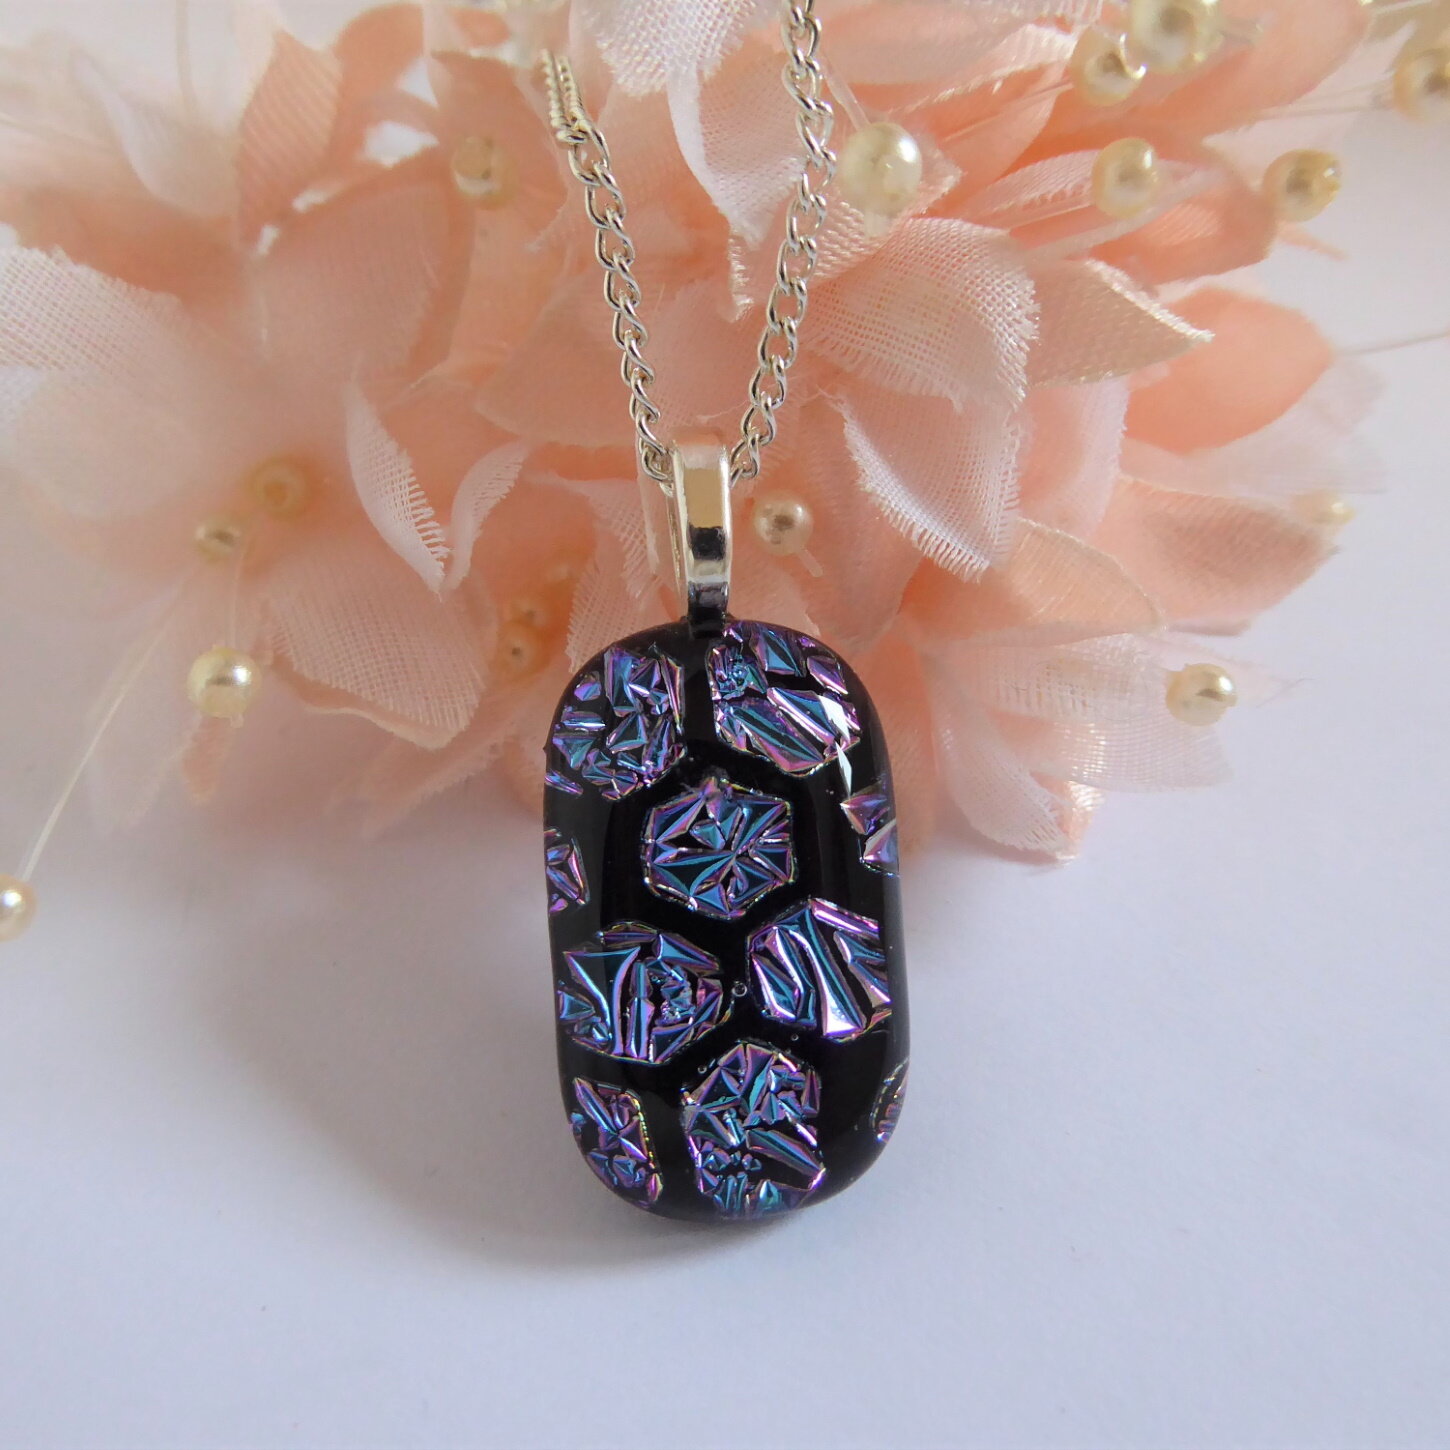 Blue fused glass pendant with a honeycomb pattern